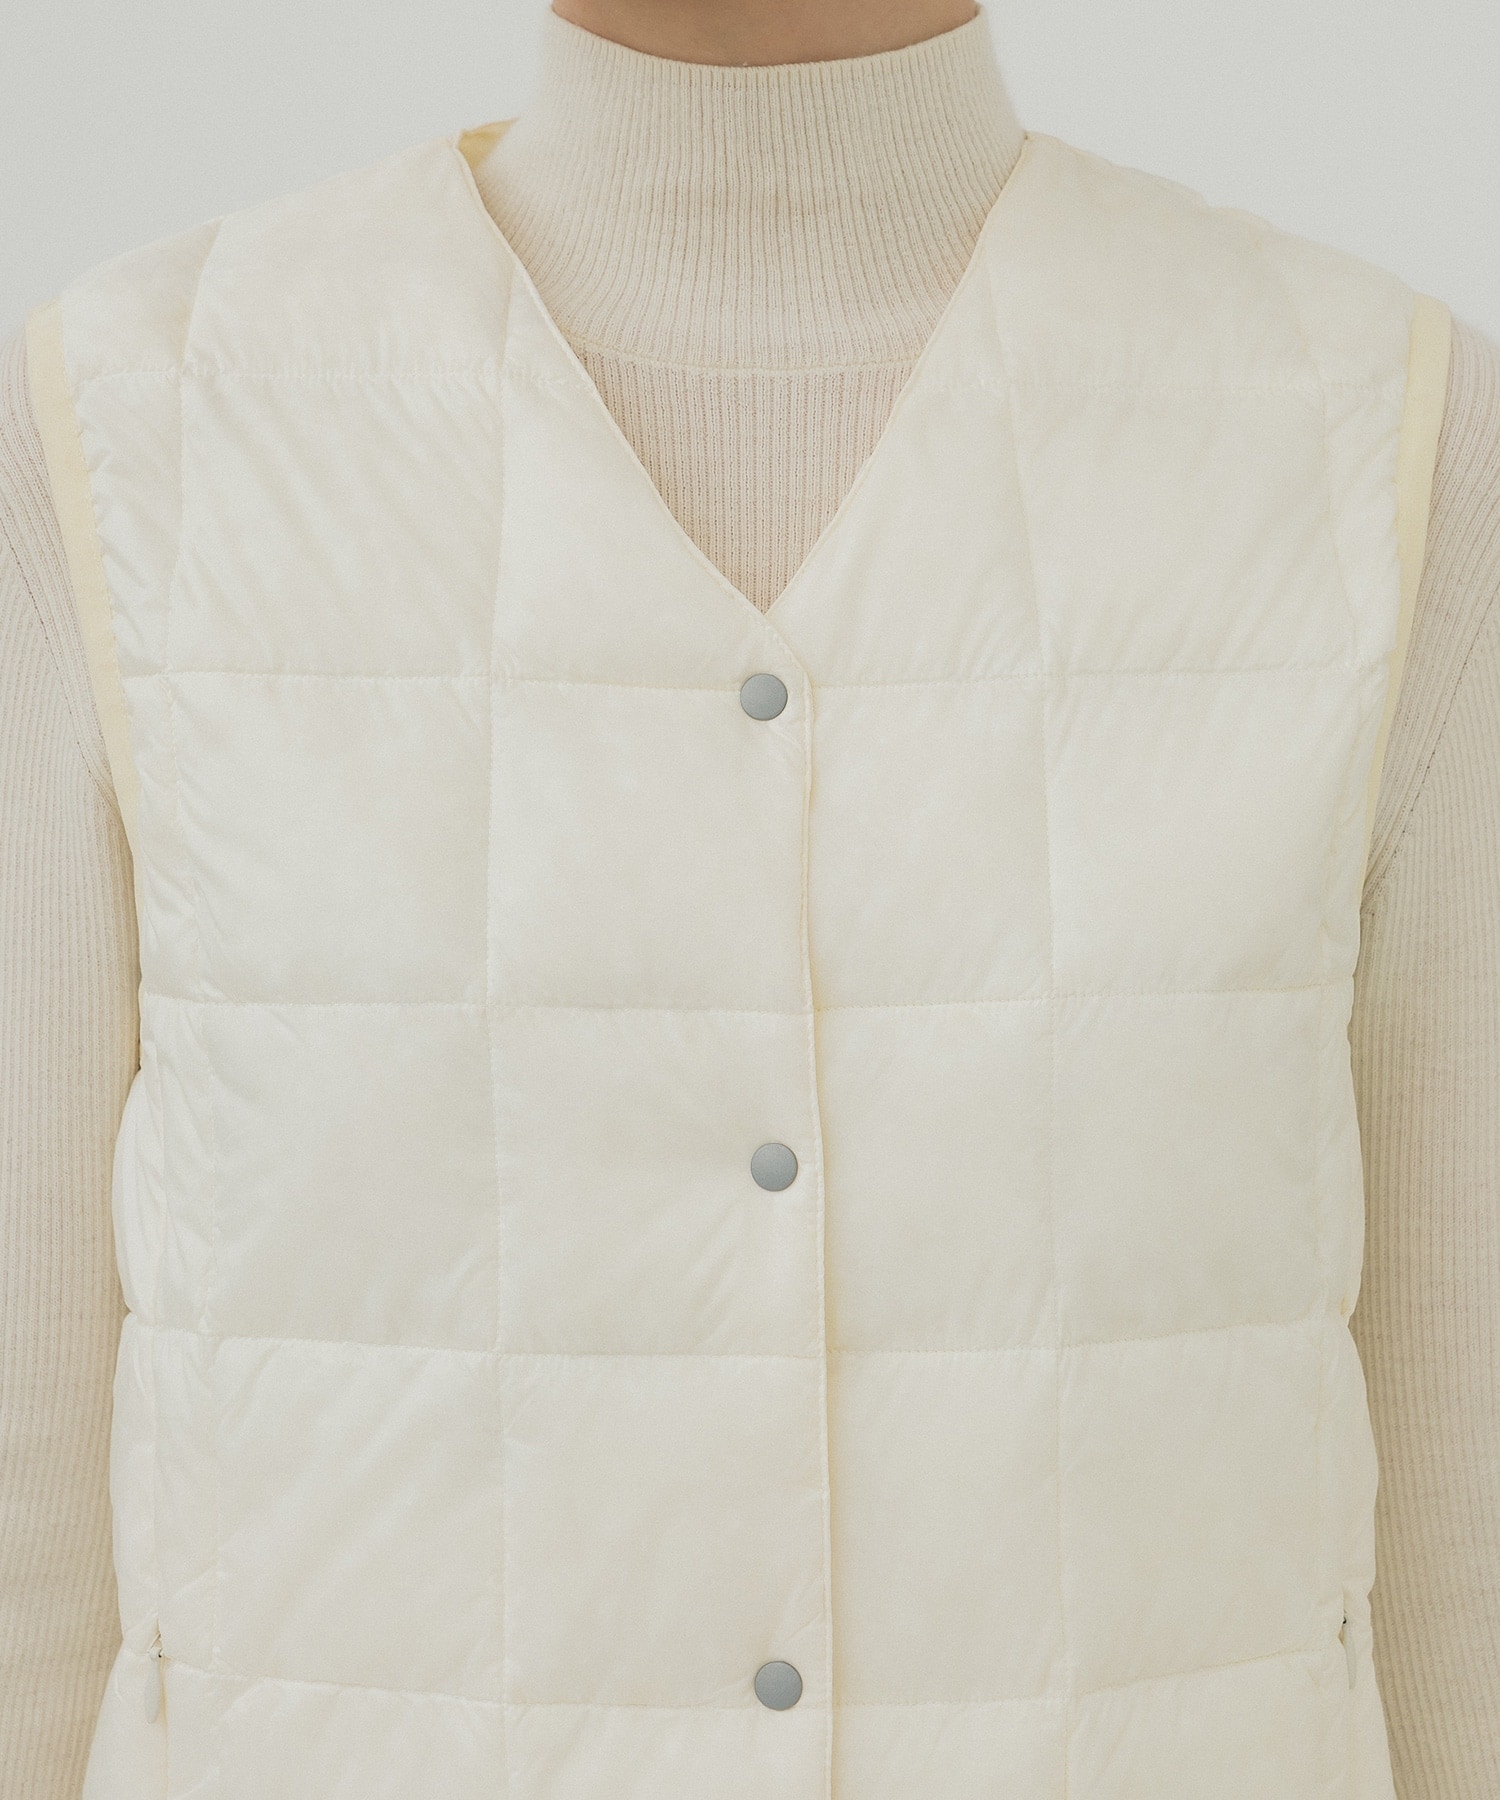 V NECK LONG DOWN VEST TAION/TAION EXTRA